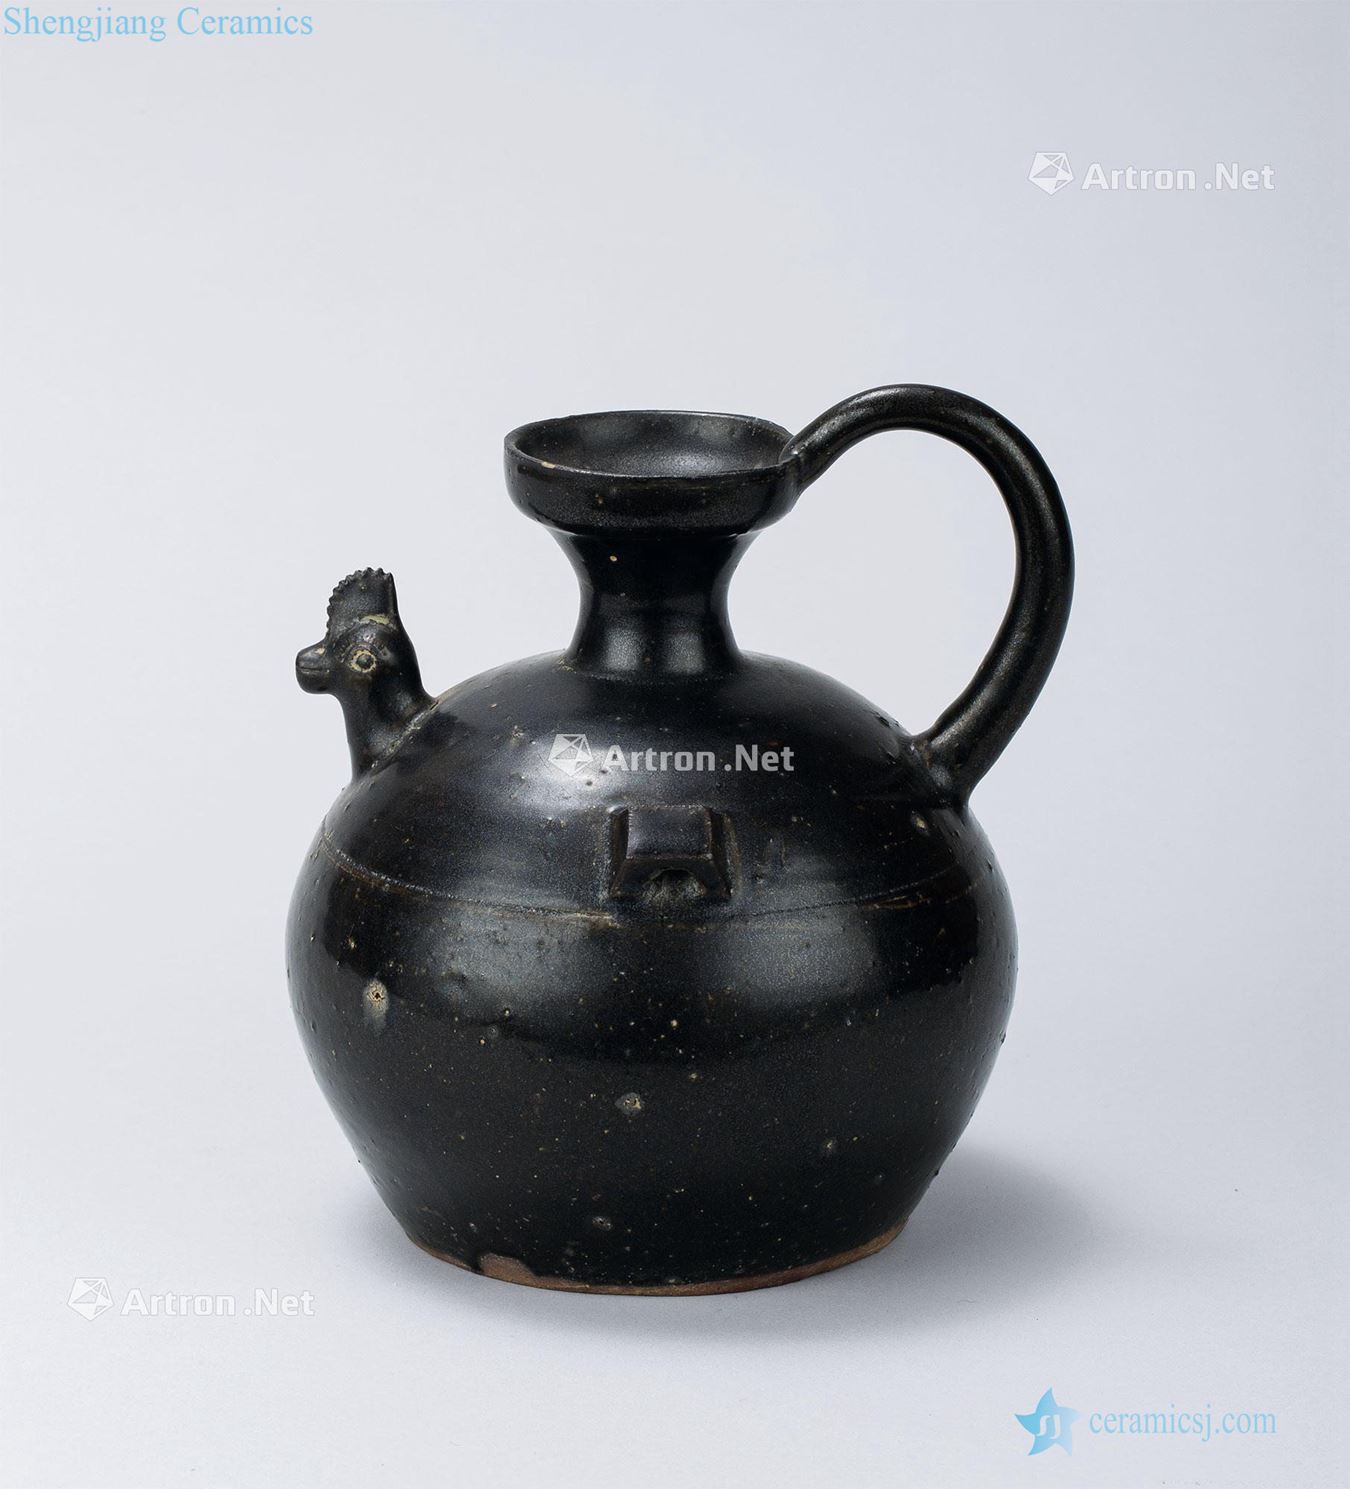 Western jin dynasty - along with the generation (265-618), the black glaze tail of pot